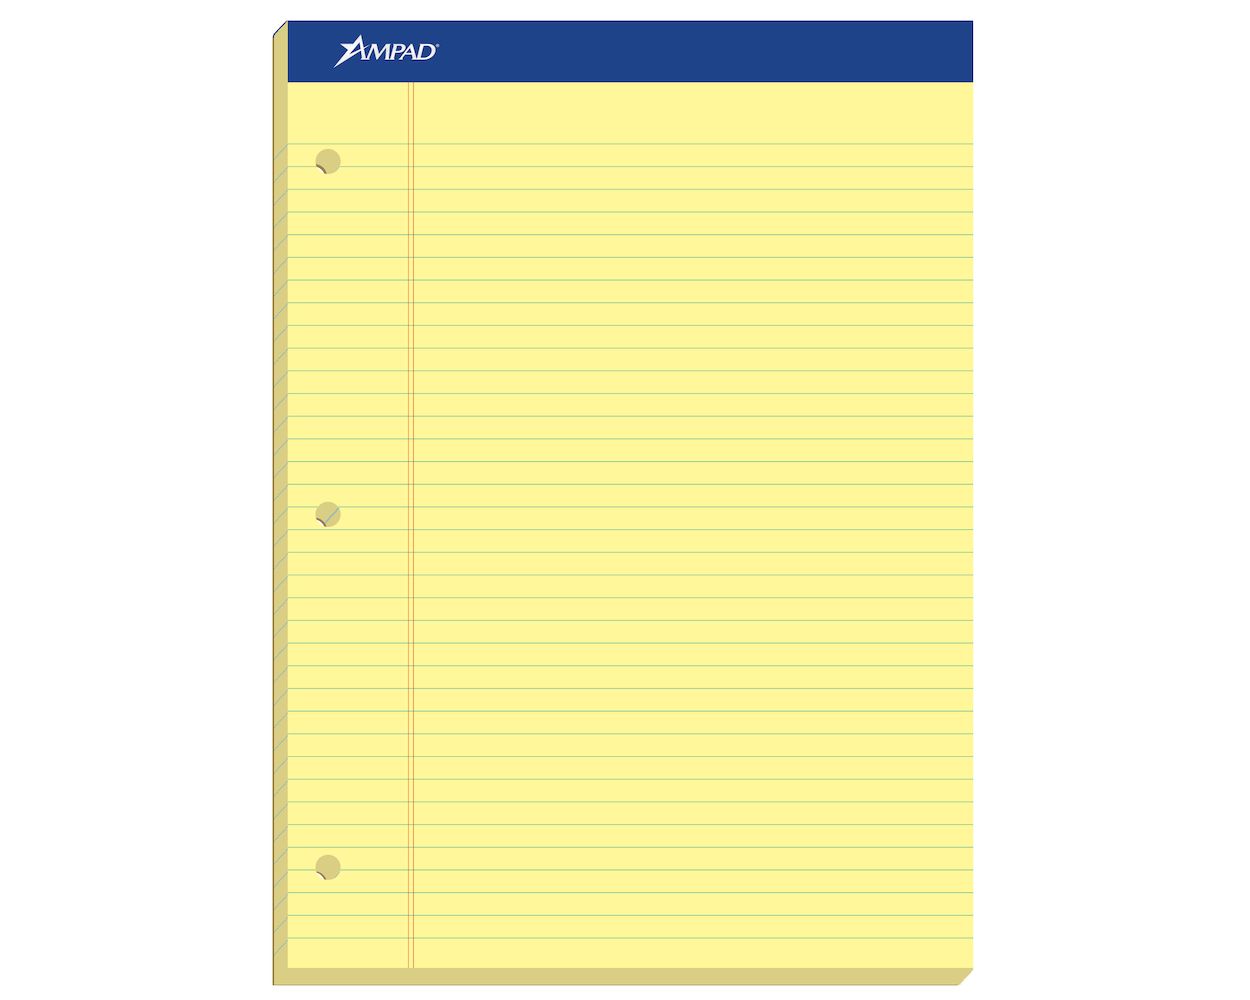 Laboratory Notebooks Ampad Double Writing Pad 4x4 Quad Ruled 100 Sheets X 1 for sale online 